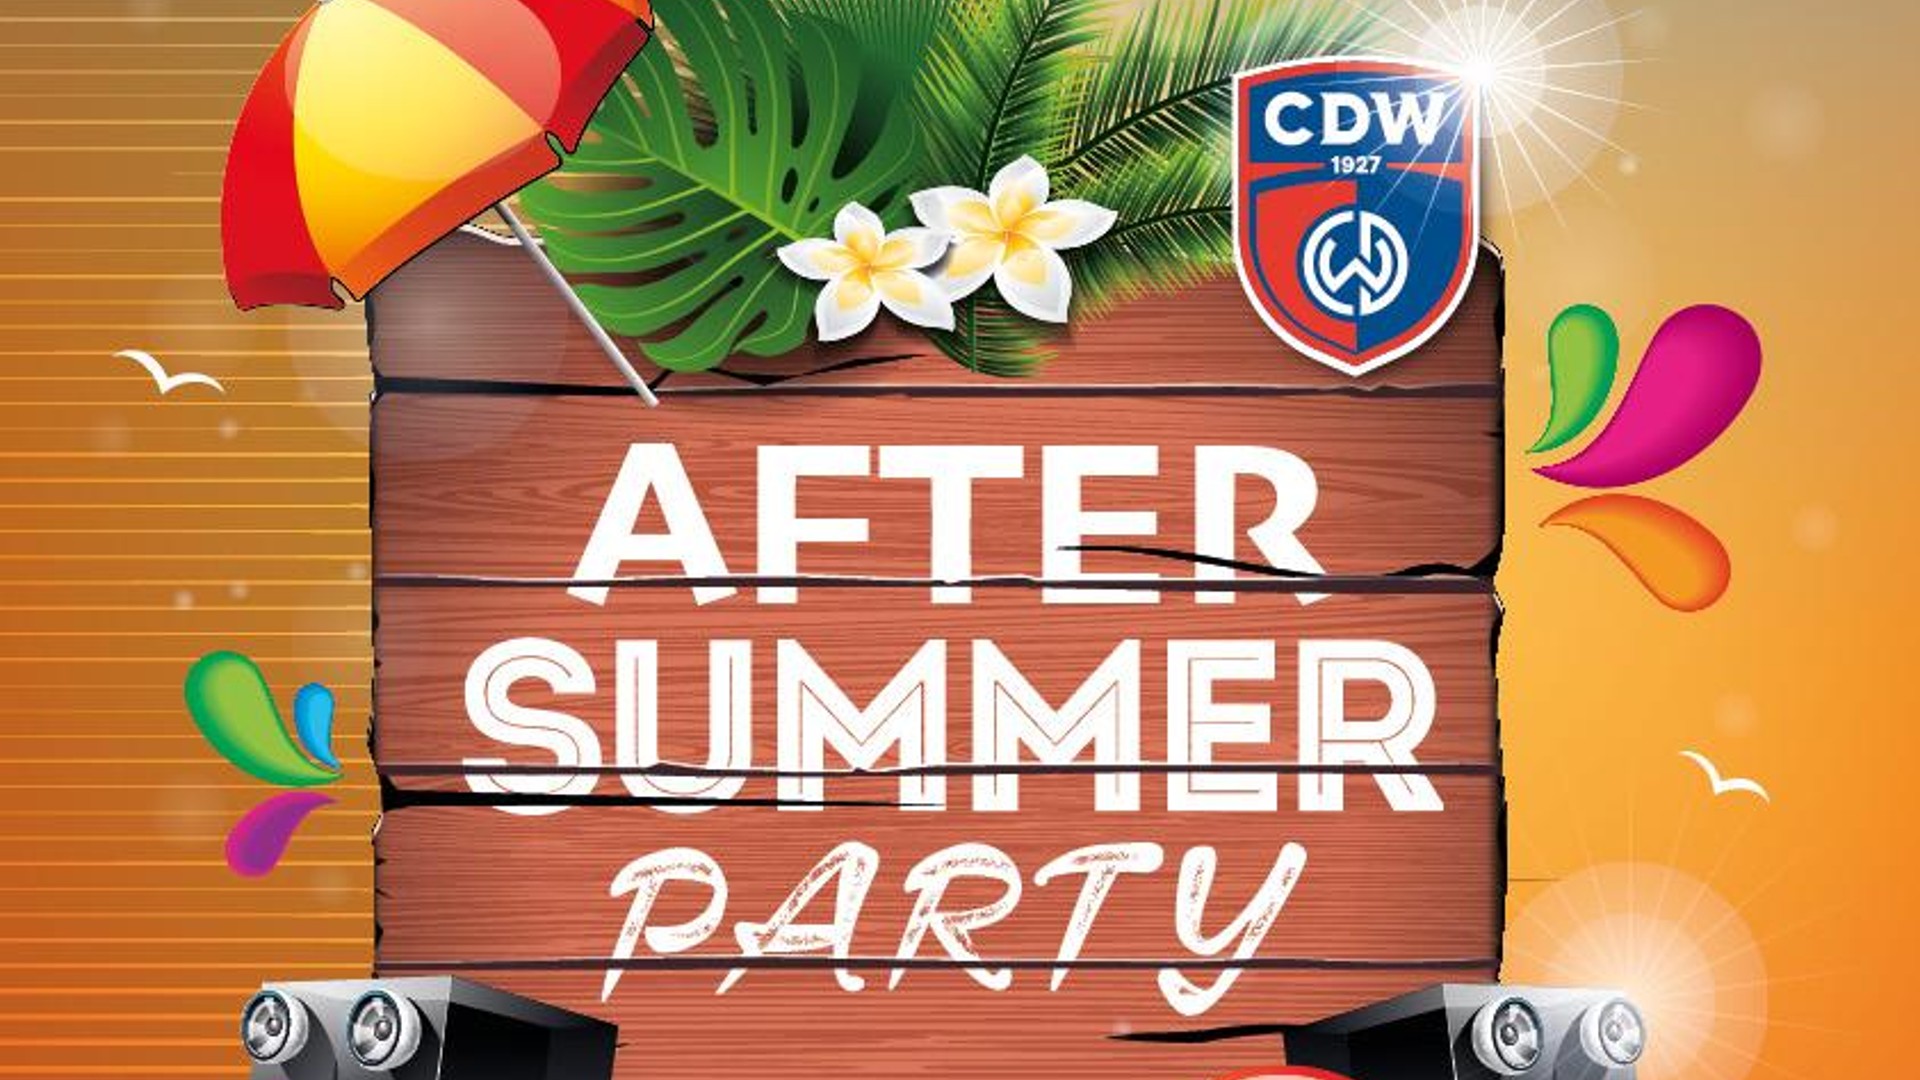 CDW’s after Summer party’23